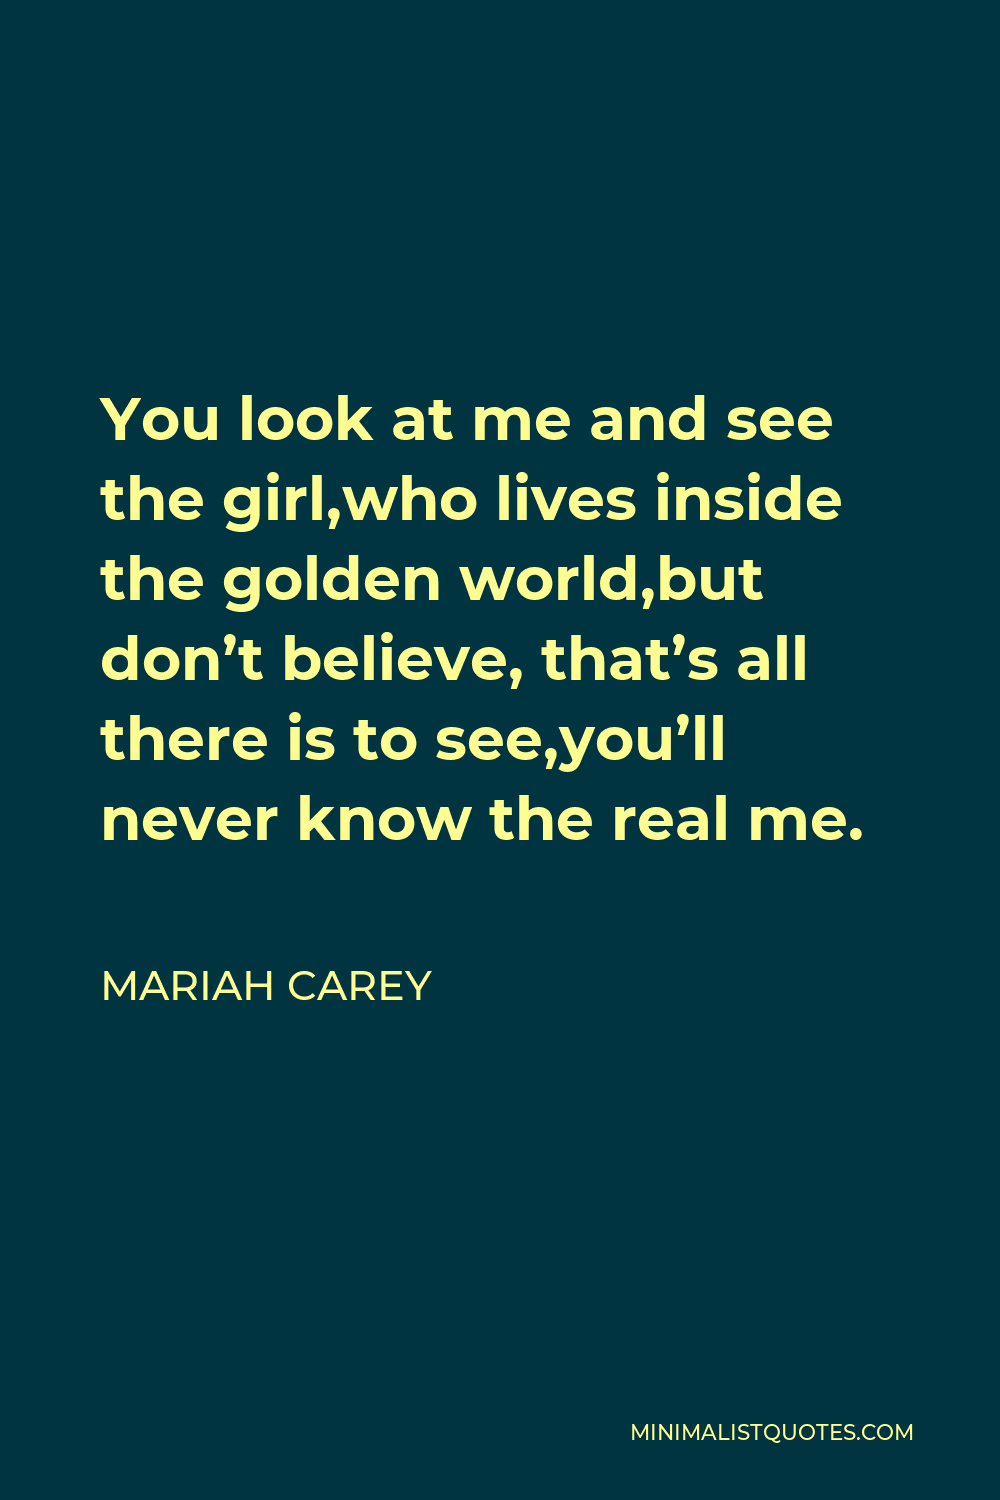 Mariah Carey Quote - You look at me and see the girl,who lives inside the golden world,but don’t believe, that’s all there is to see,you’ll never know the real me.